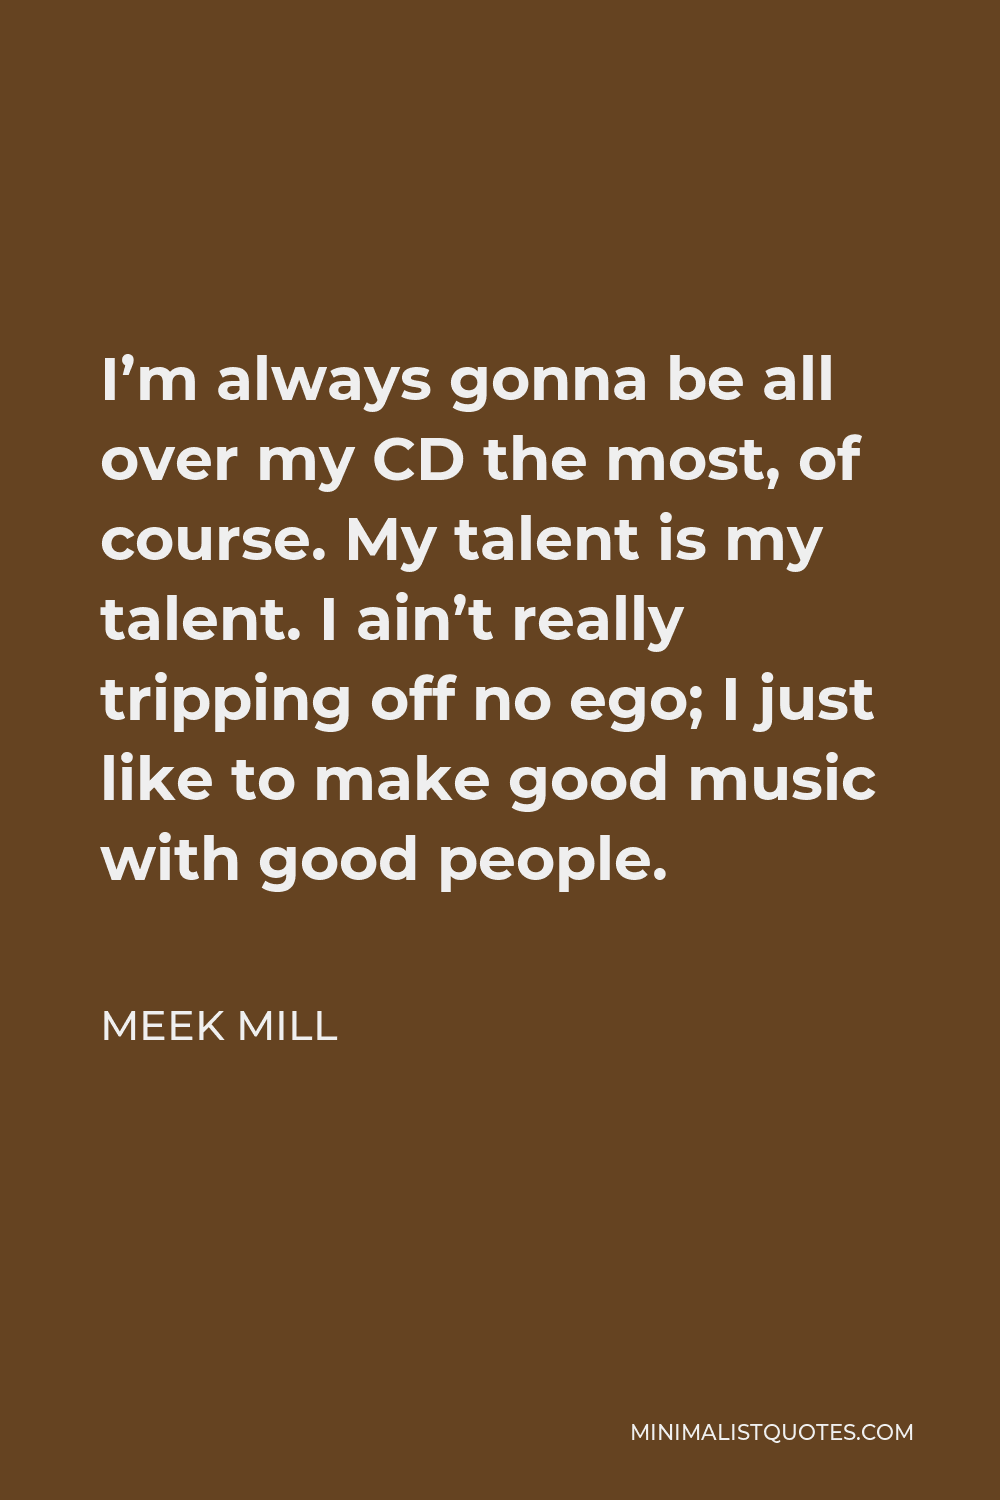 Meek Mill Quote - I’m always gonna be all over my CD the most, of course. My talent is my talent. I ain’t really tripping off no ego; I just like to make good music with good people.